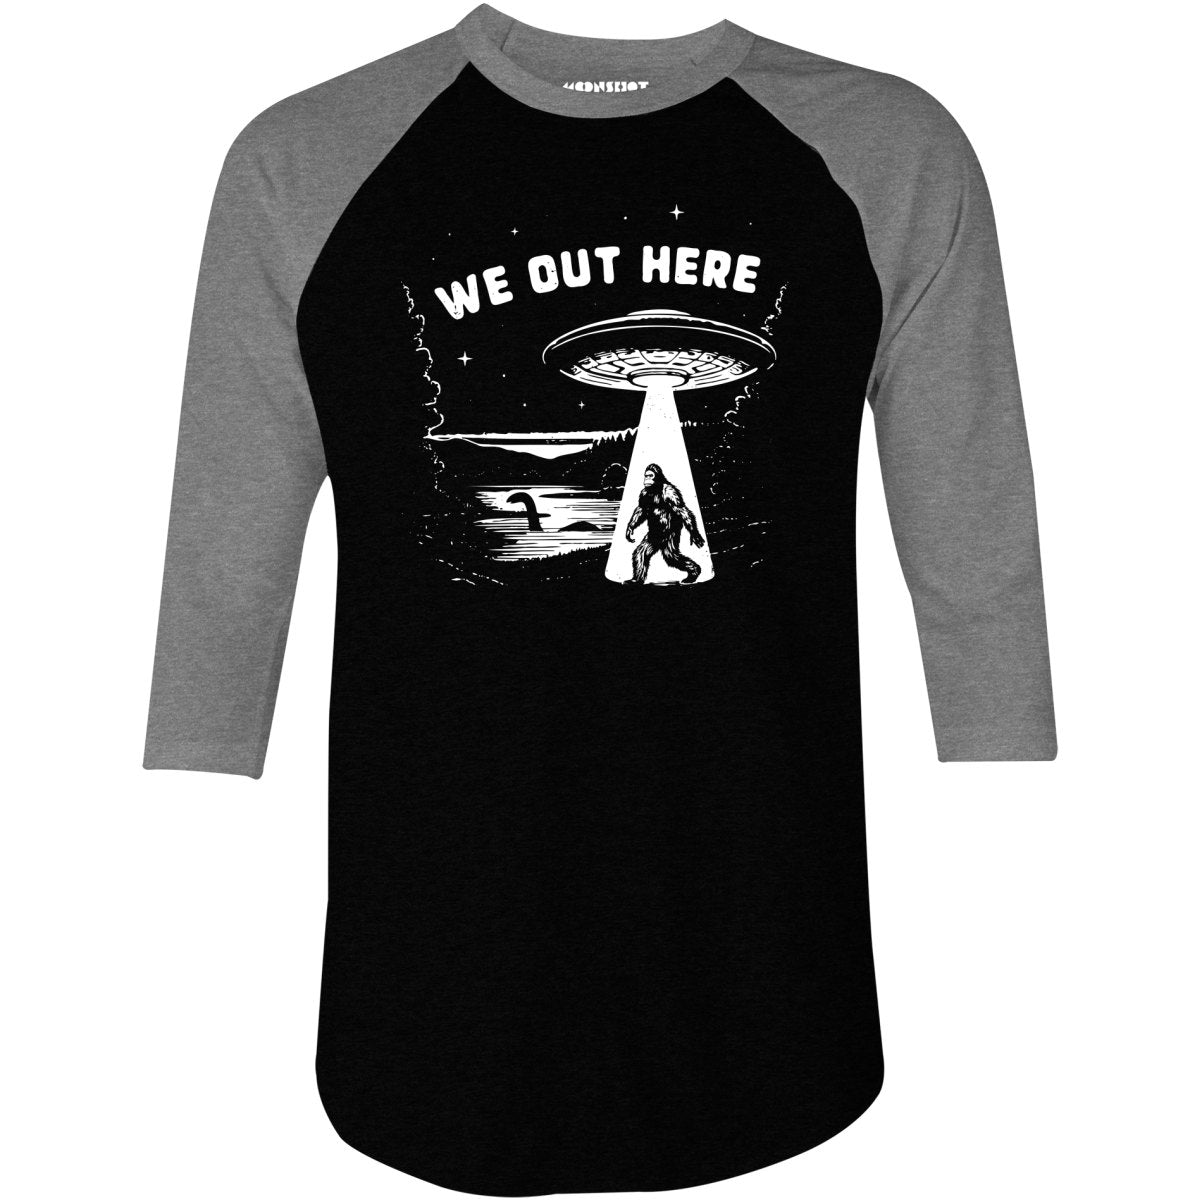 We Out Here - 3/4 Sleeve Raglan T-Shirt